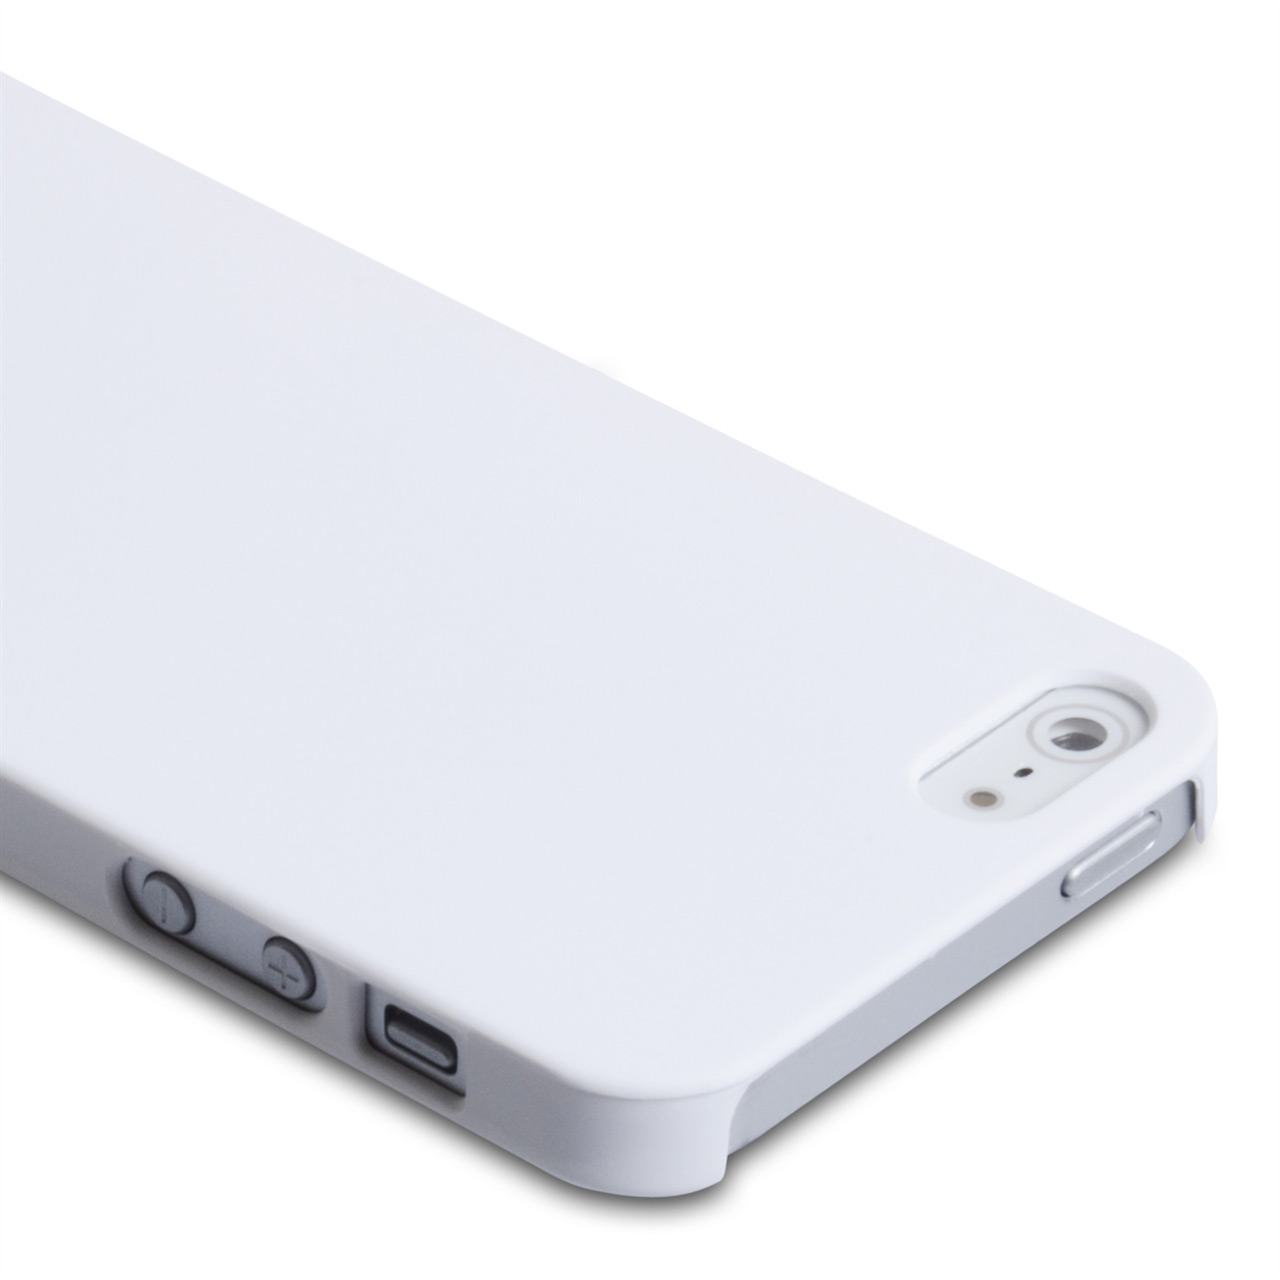 YouSave Accessories iPhone 5 / 5S Hard Hybrid Case - White